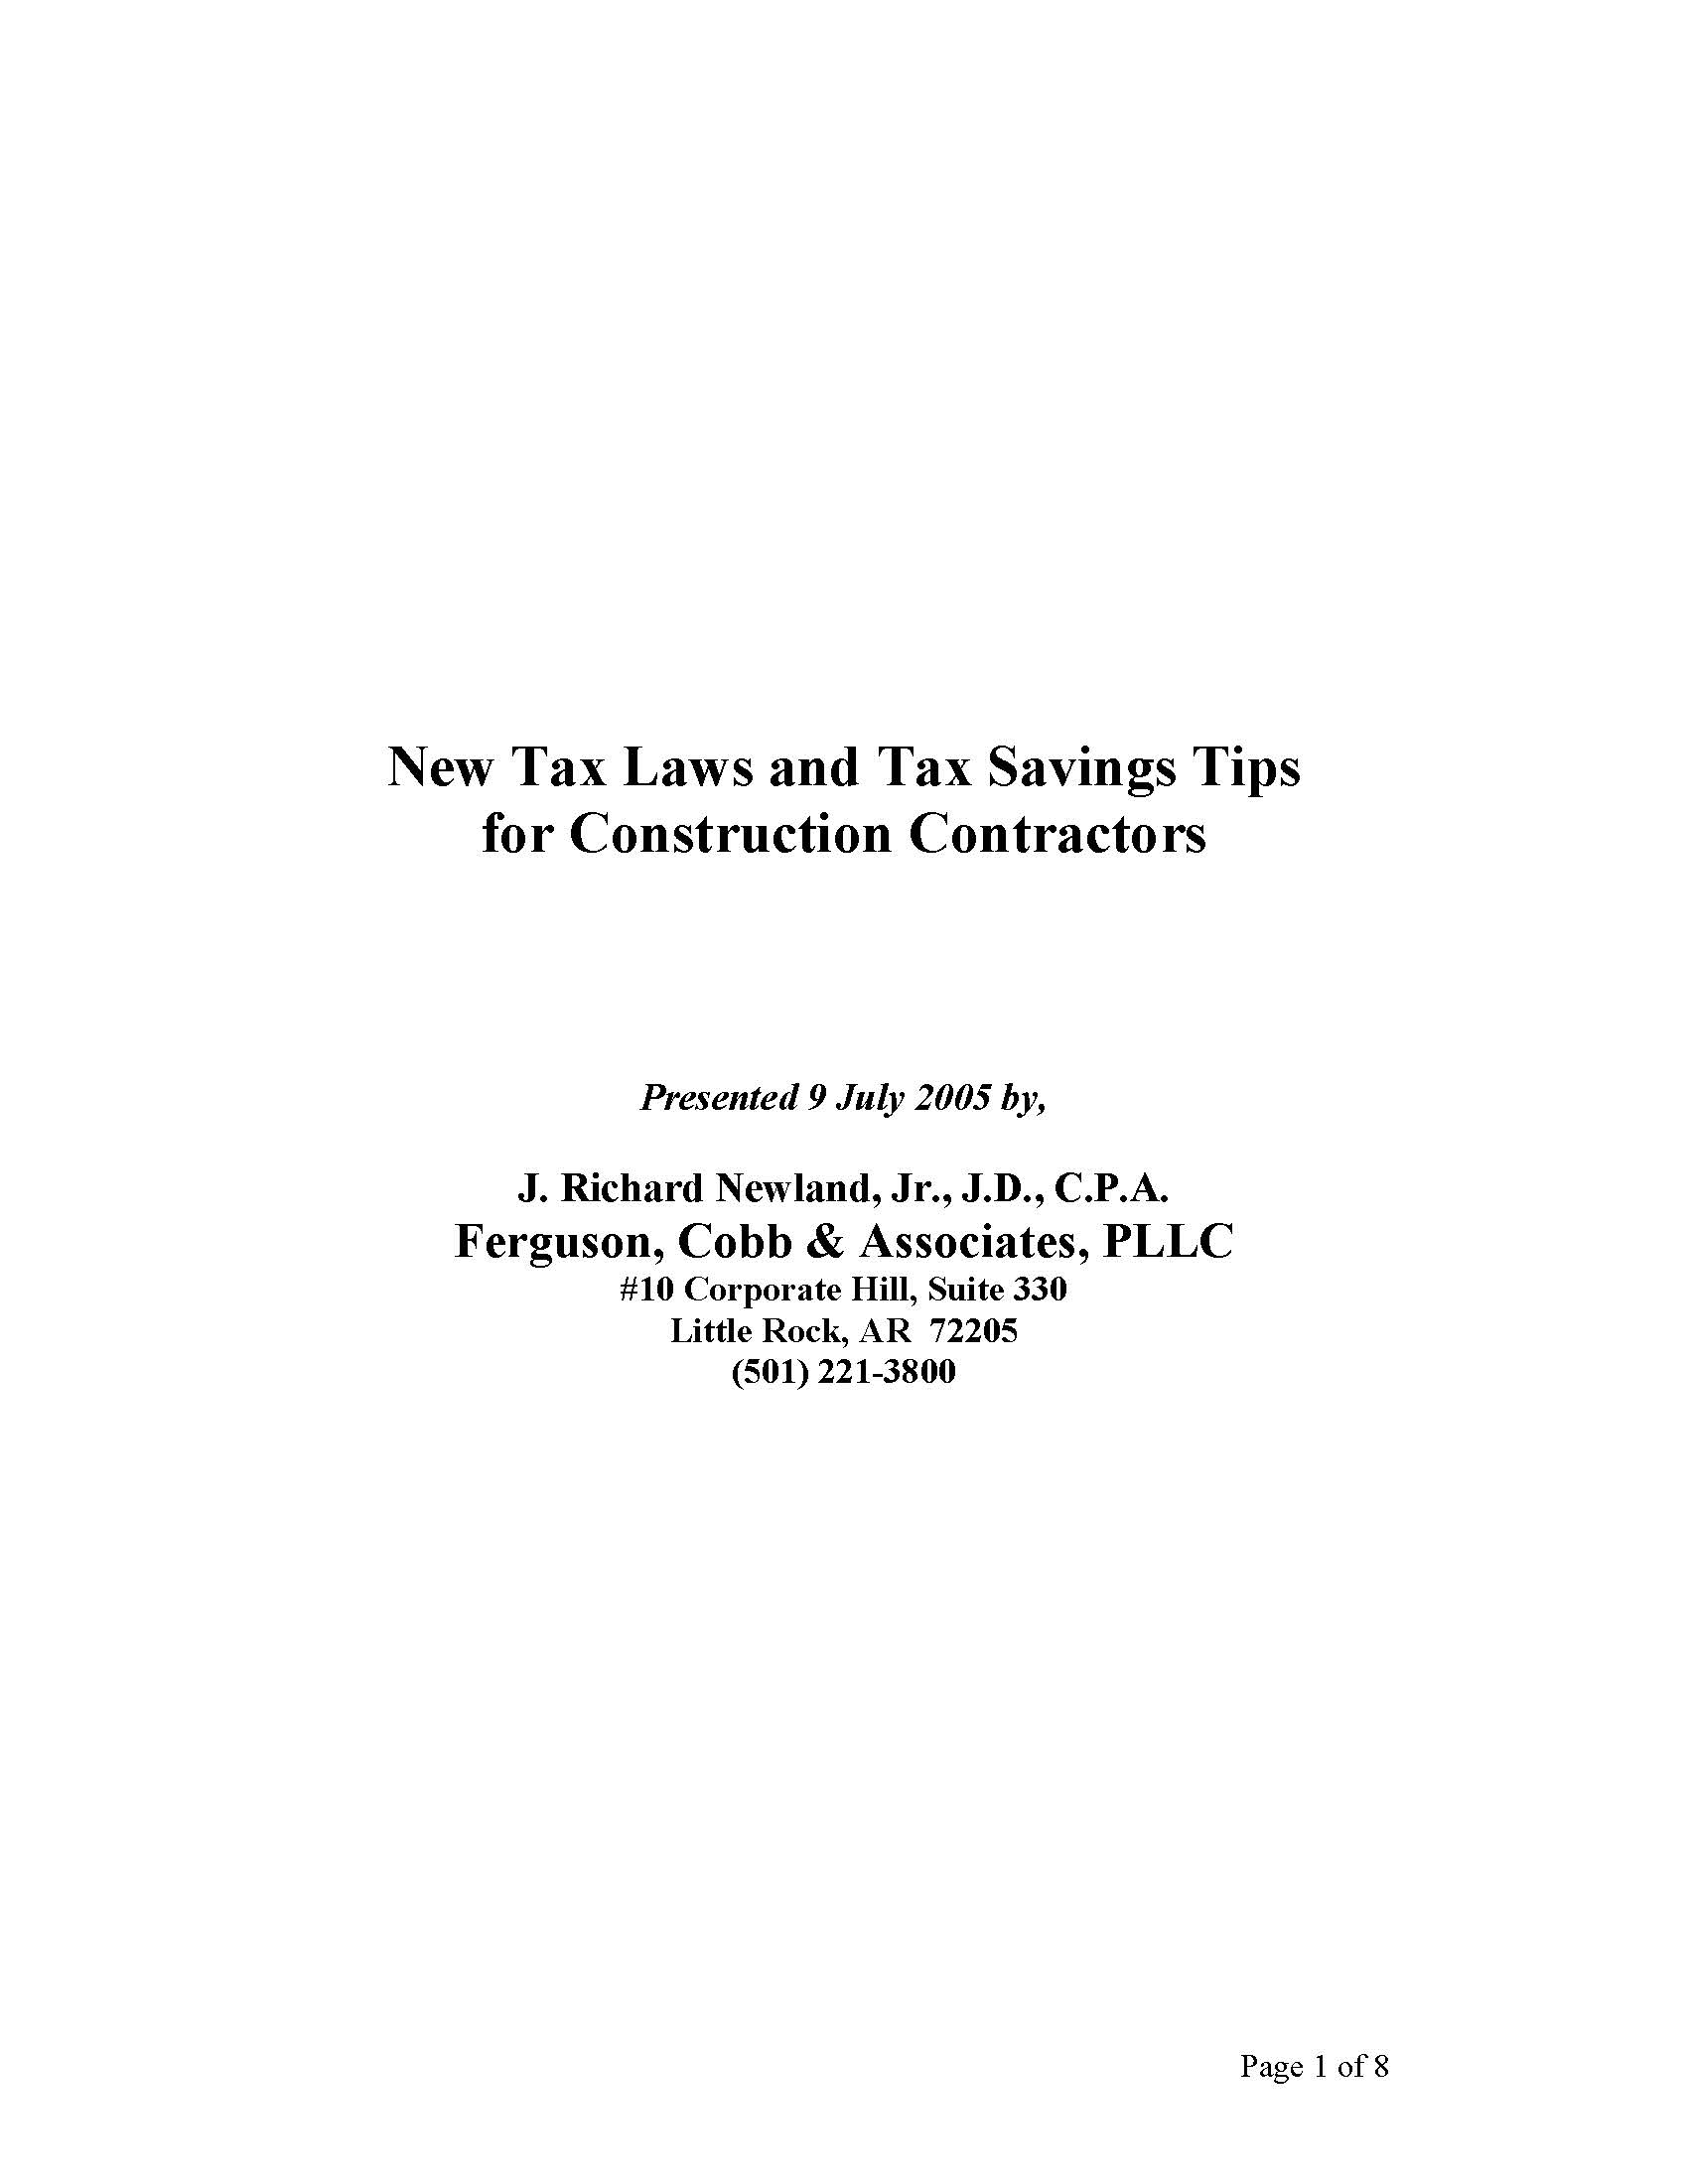 new-tax-laws-and-tax-savings-tips-fca_Page_1.jpg